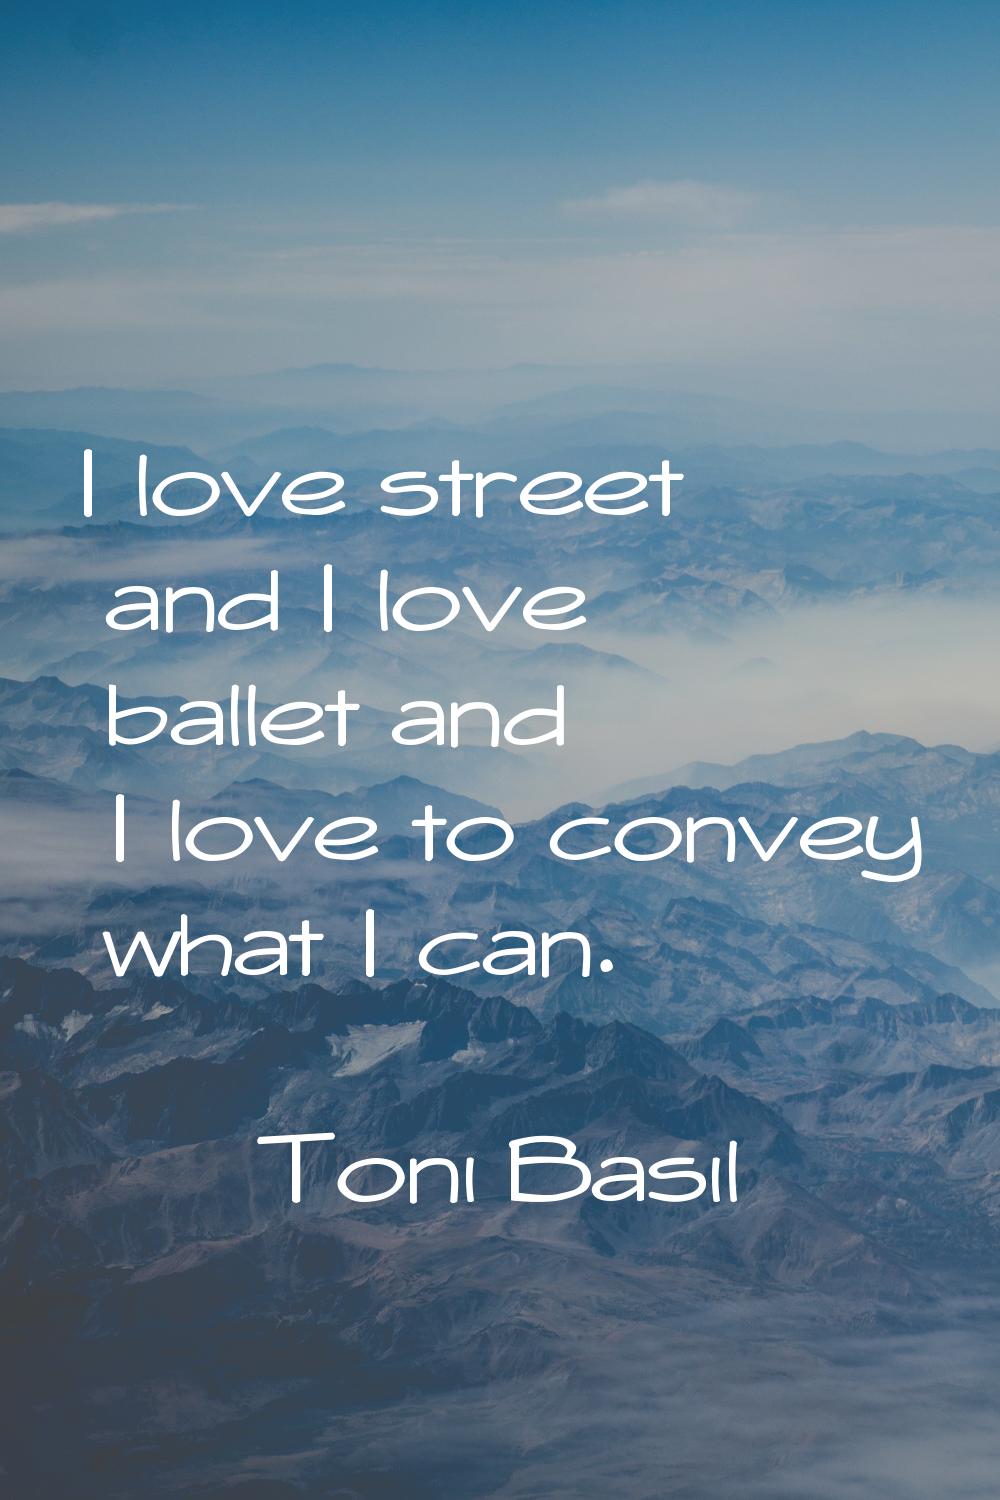 I love street and I love ballet and I love to convey what I can.